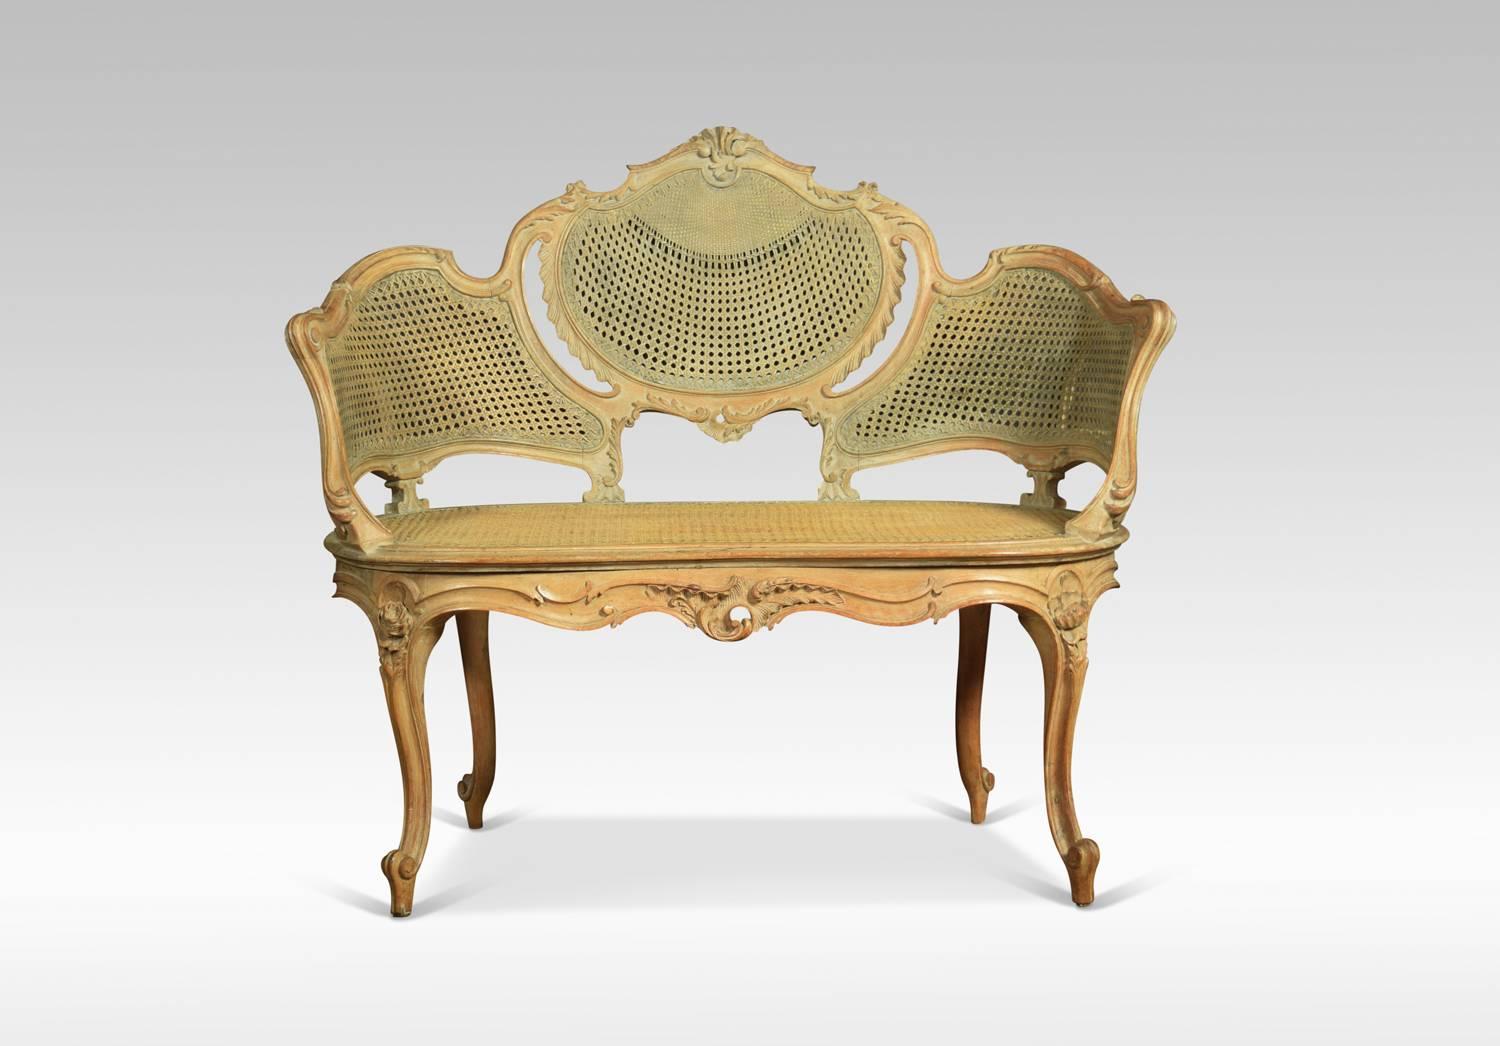 French Louis XVI style canapé settee, the carved rail in the typical manner of the period, with detailed leaf motifs. To the scrolling arms, flanking around canework back and seat. The canape´ rests on four carved tapering cabriole